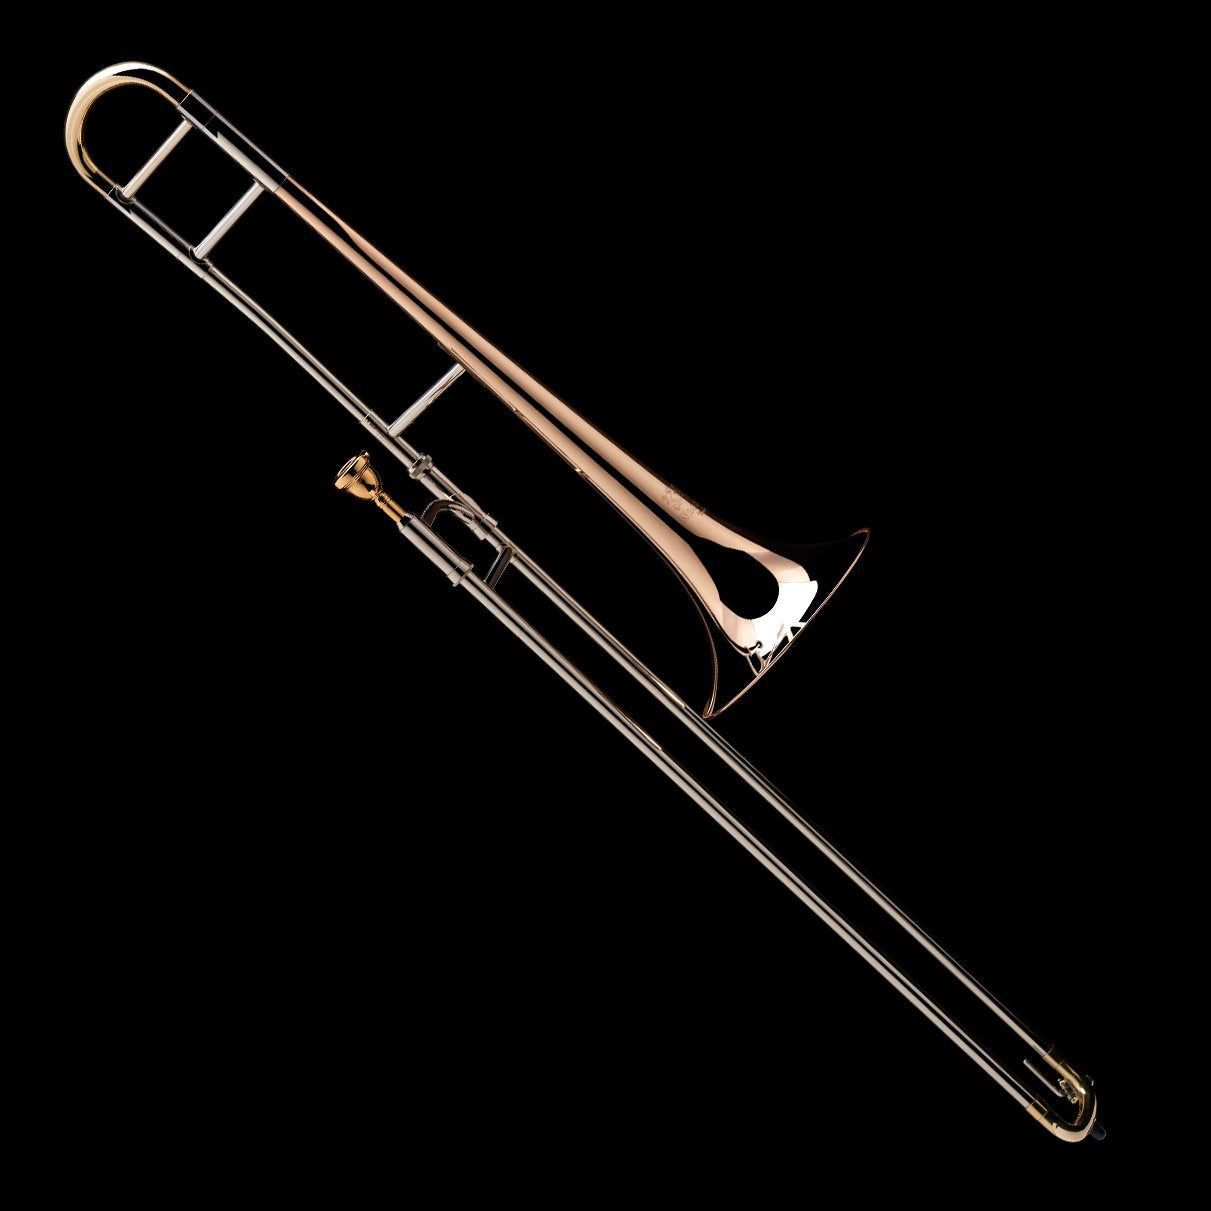 An image of a Bb Tenor Trombone from Wessex Tubas, facing downwards and to the right